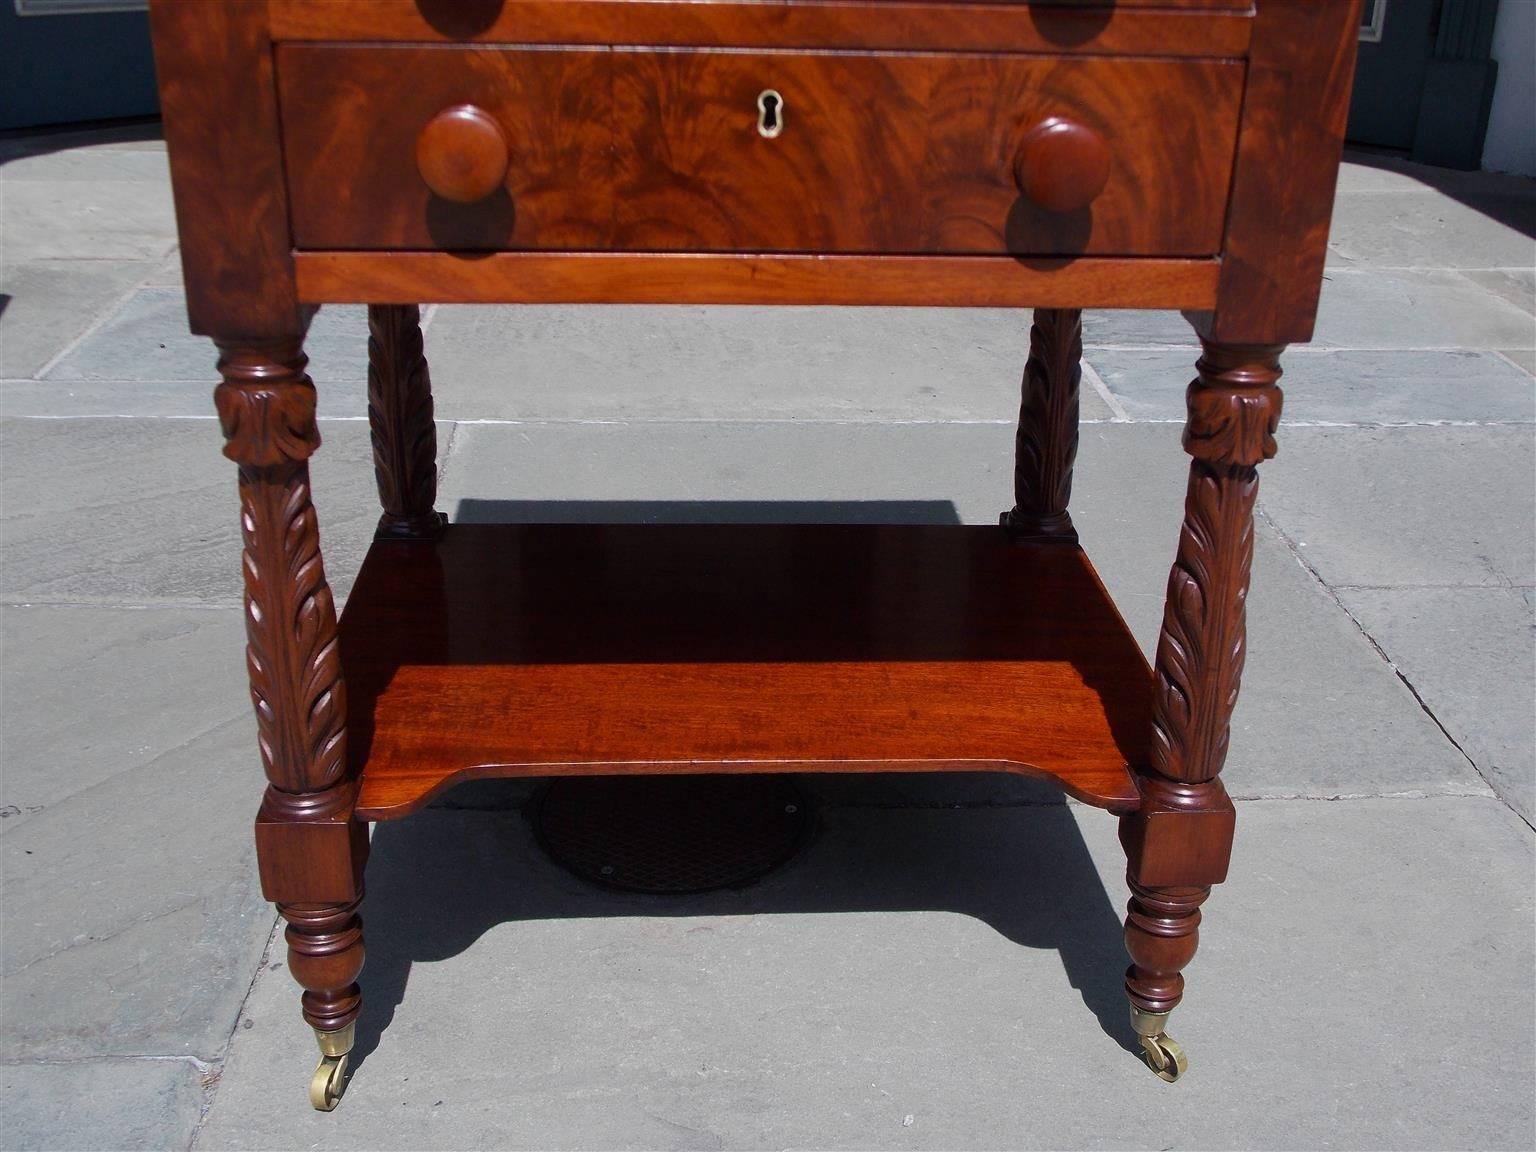 Brass American Sheraton Mahogany Three-Drawer Acanthus Carved Side Table, Circa 1820